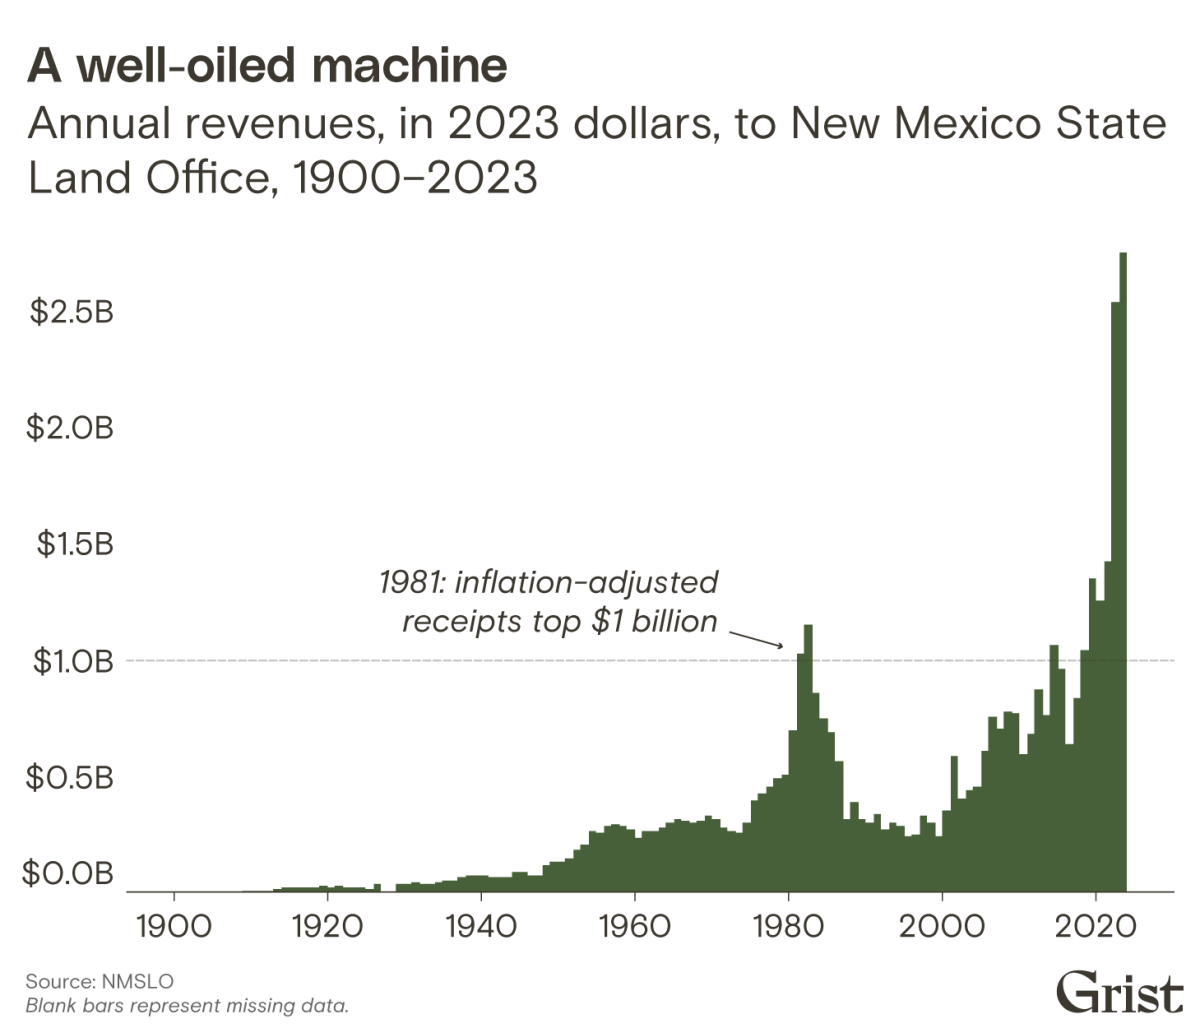 A bar chart showing annual oil revenues to New Mexico State Land Office from 1925 to 2022.